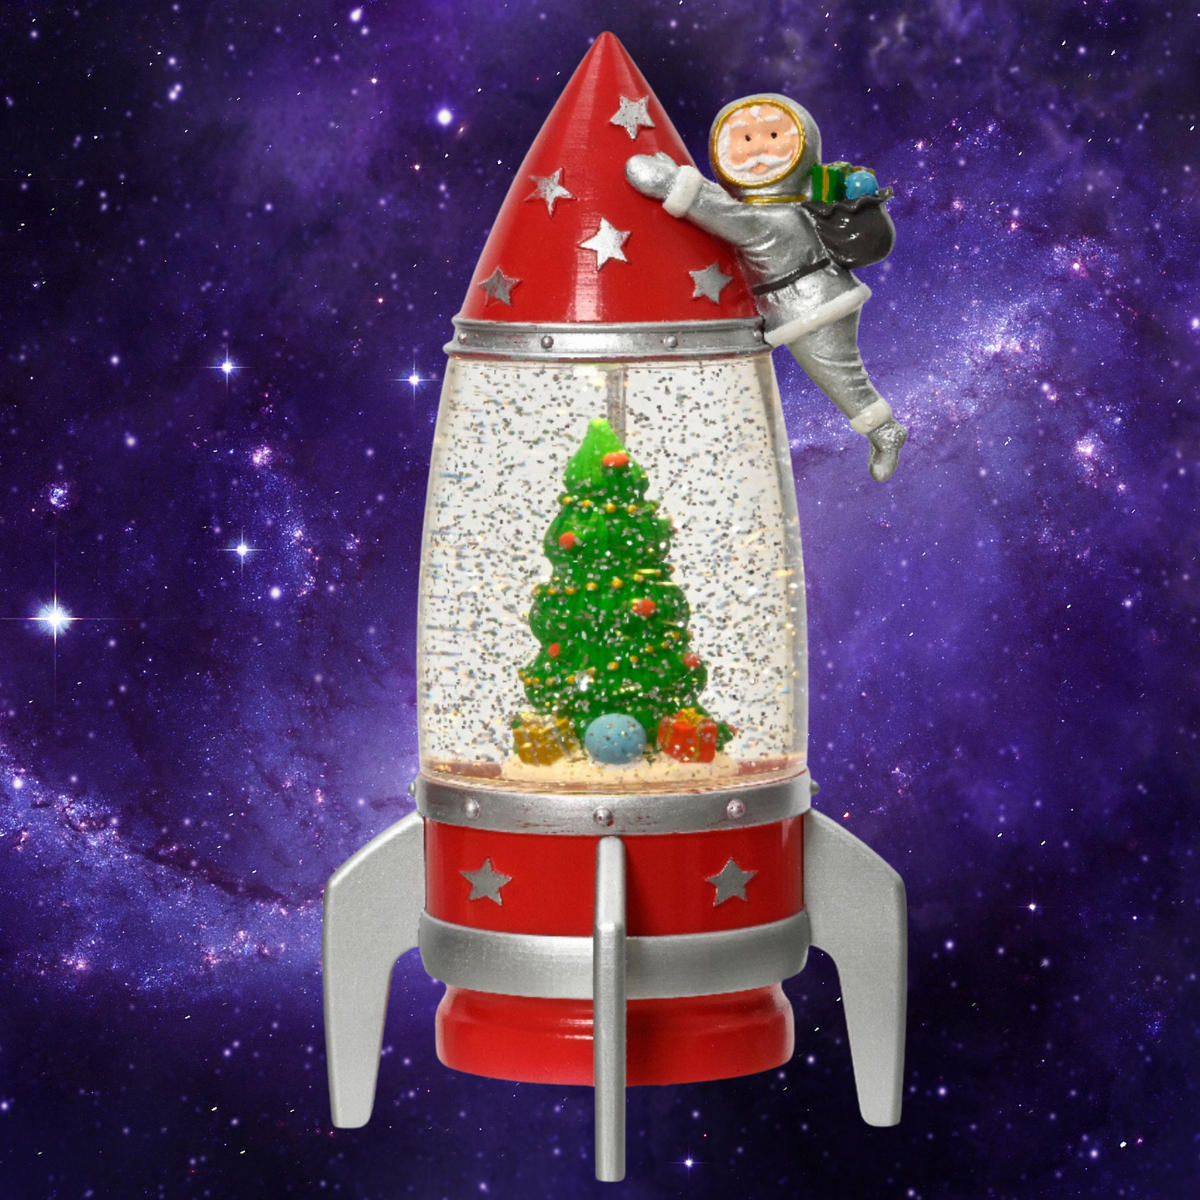 Rocket Ship Magical Christmas Water Spinner with Santa Astronaut